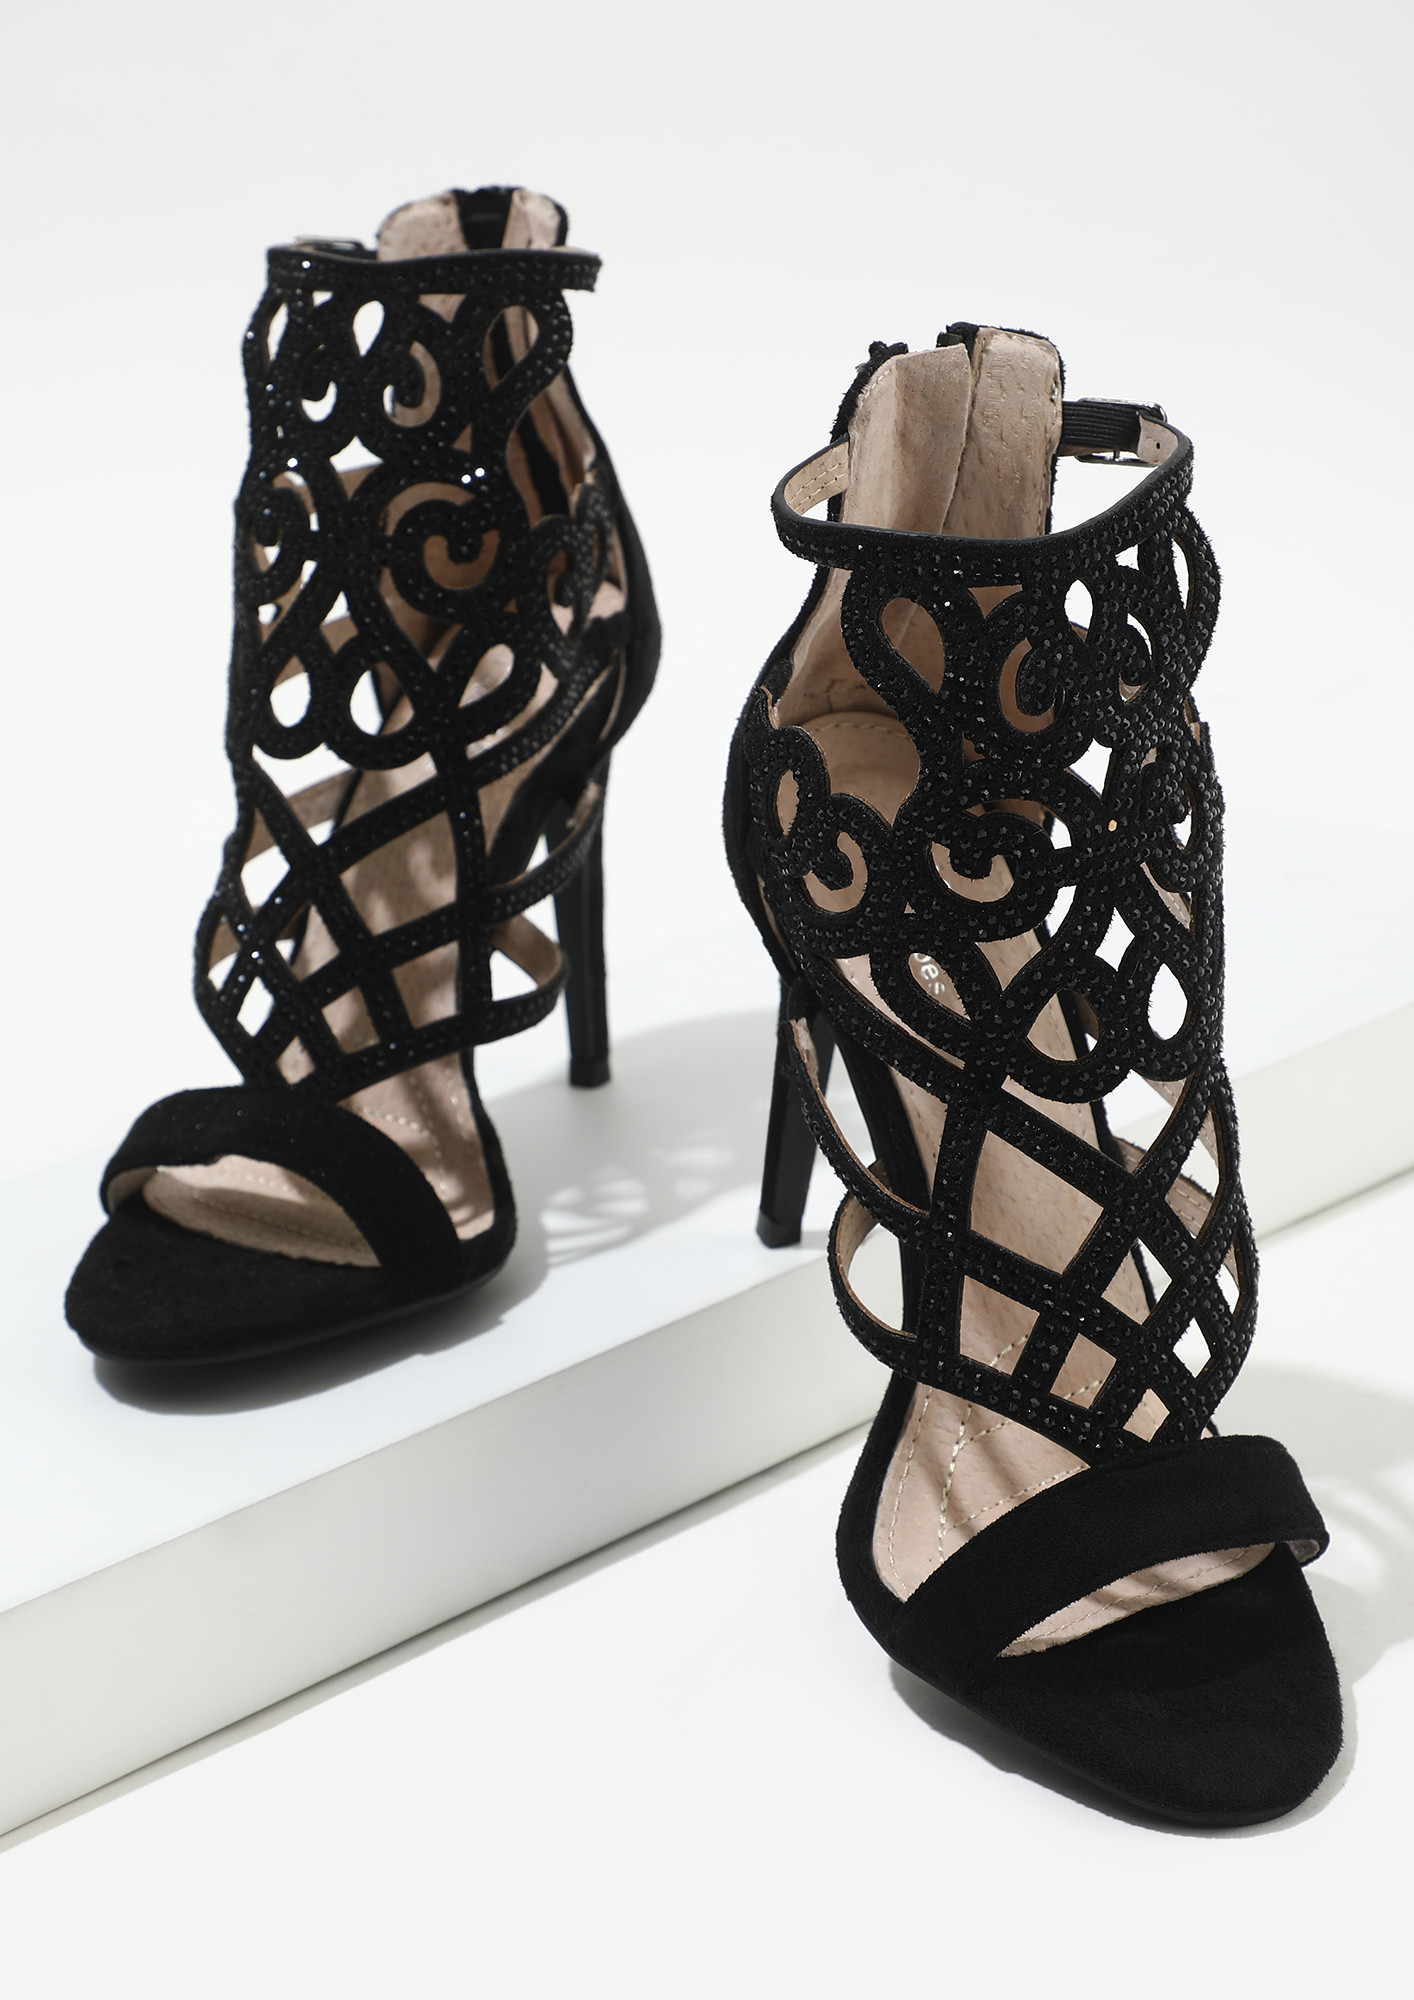 Attention, It's Mysterious Black Heeled Sandals